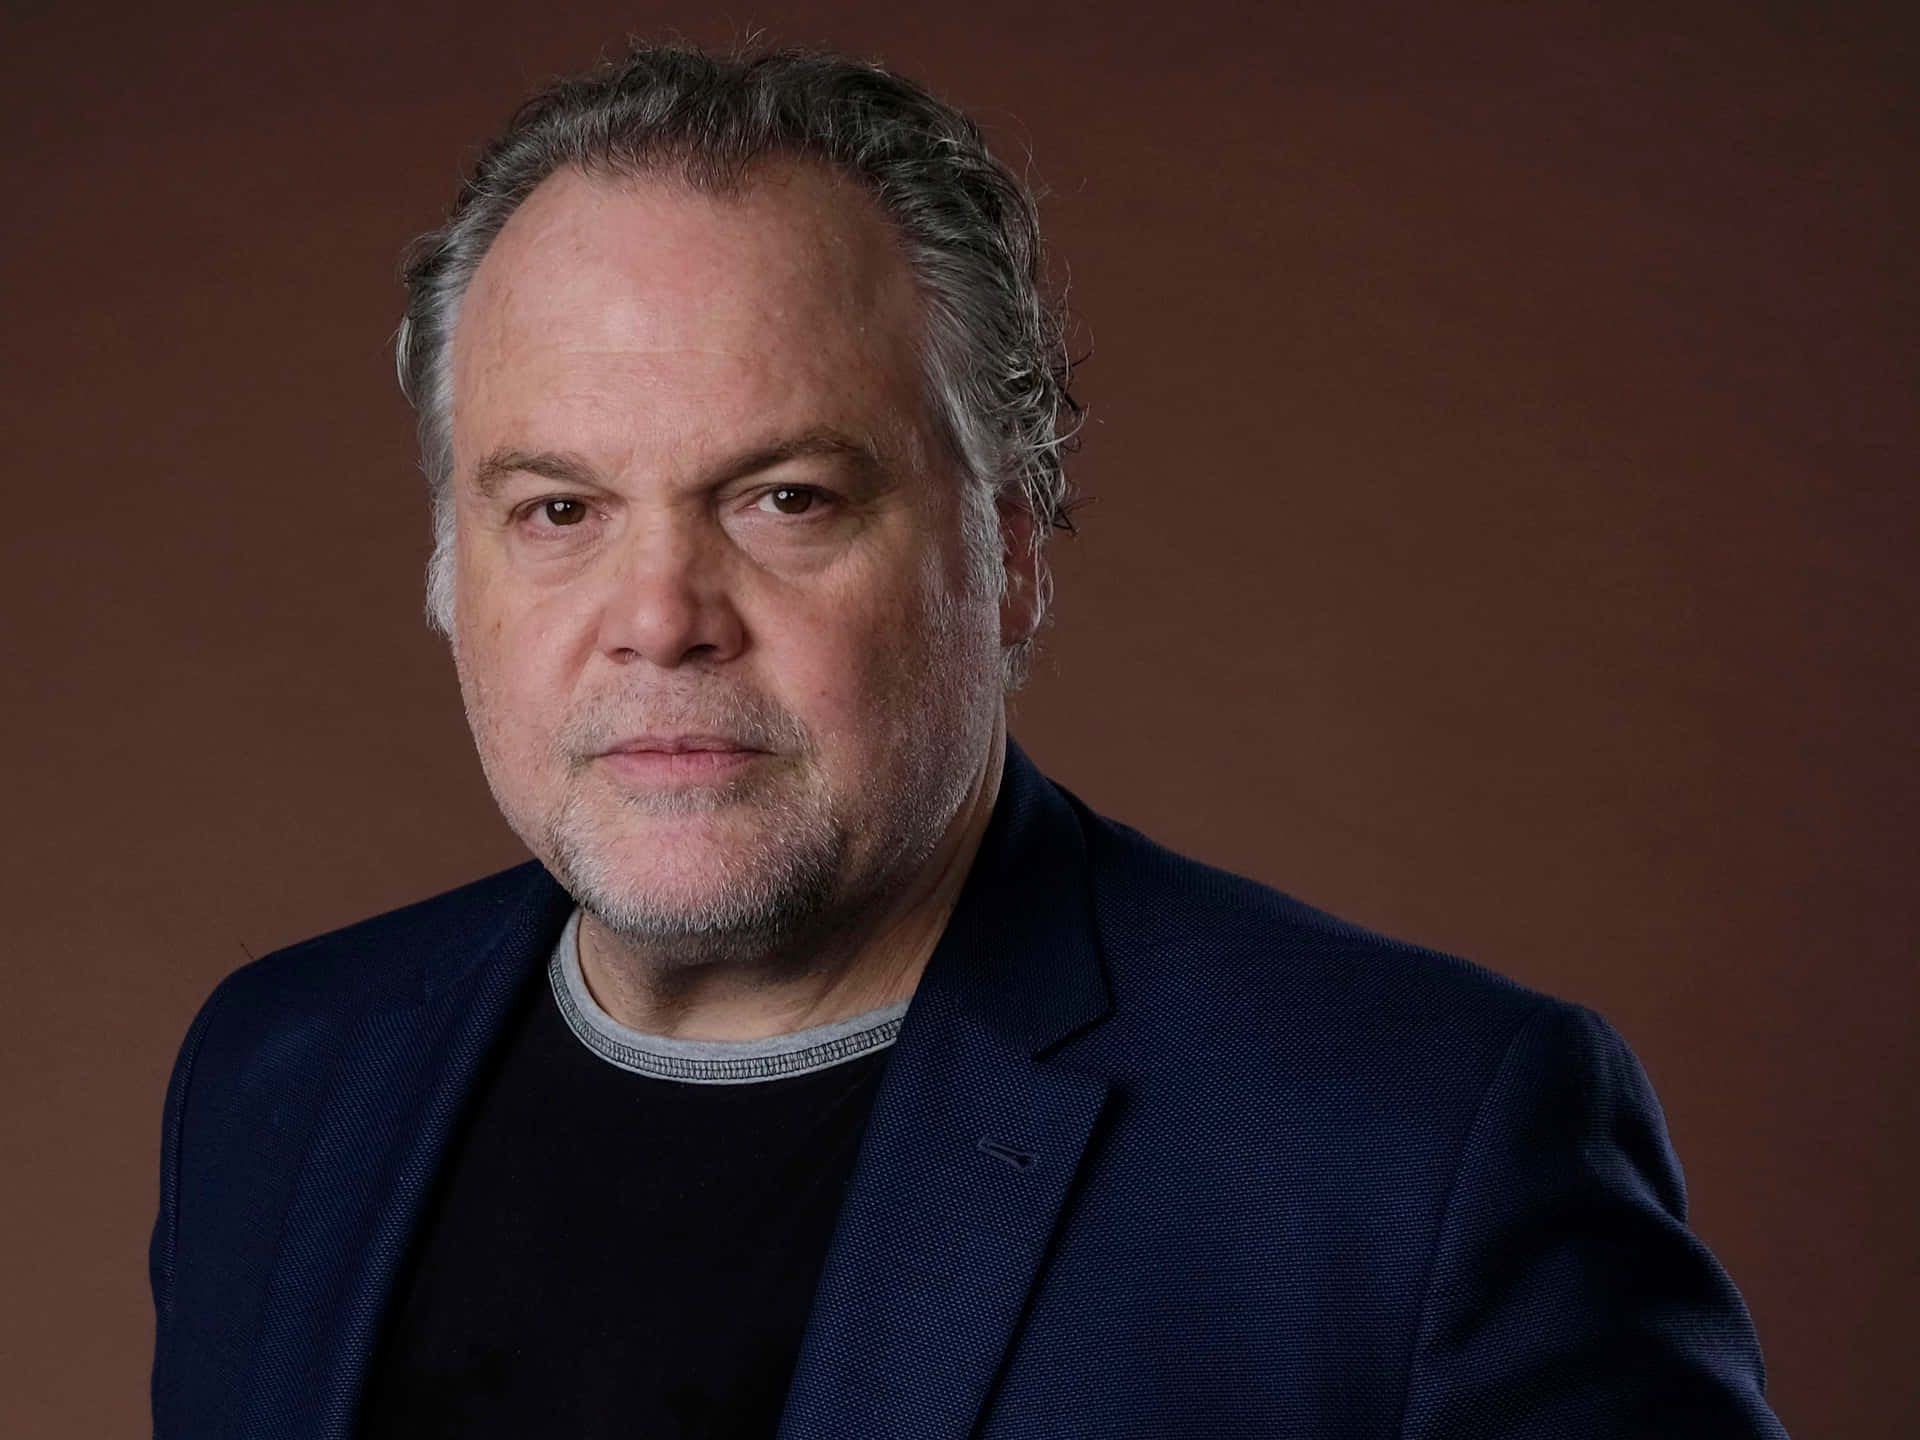 Vincent D'Onofrio strikes an intense pose in a dark suit Wallpaper